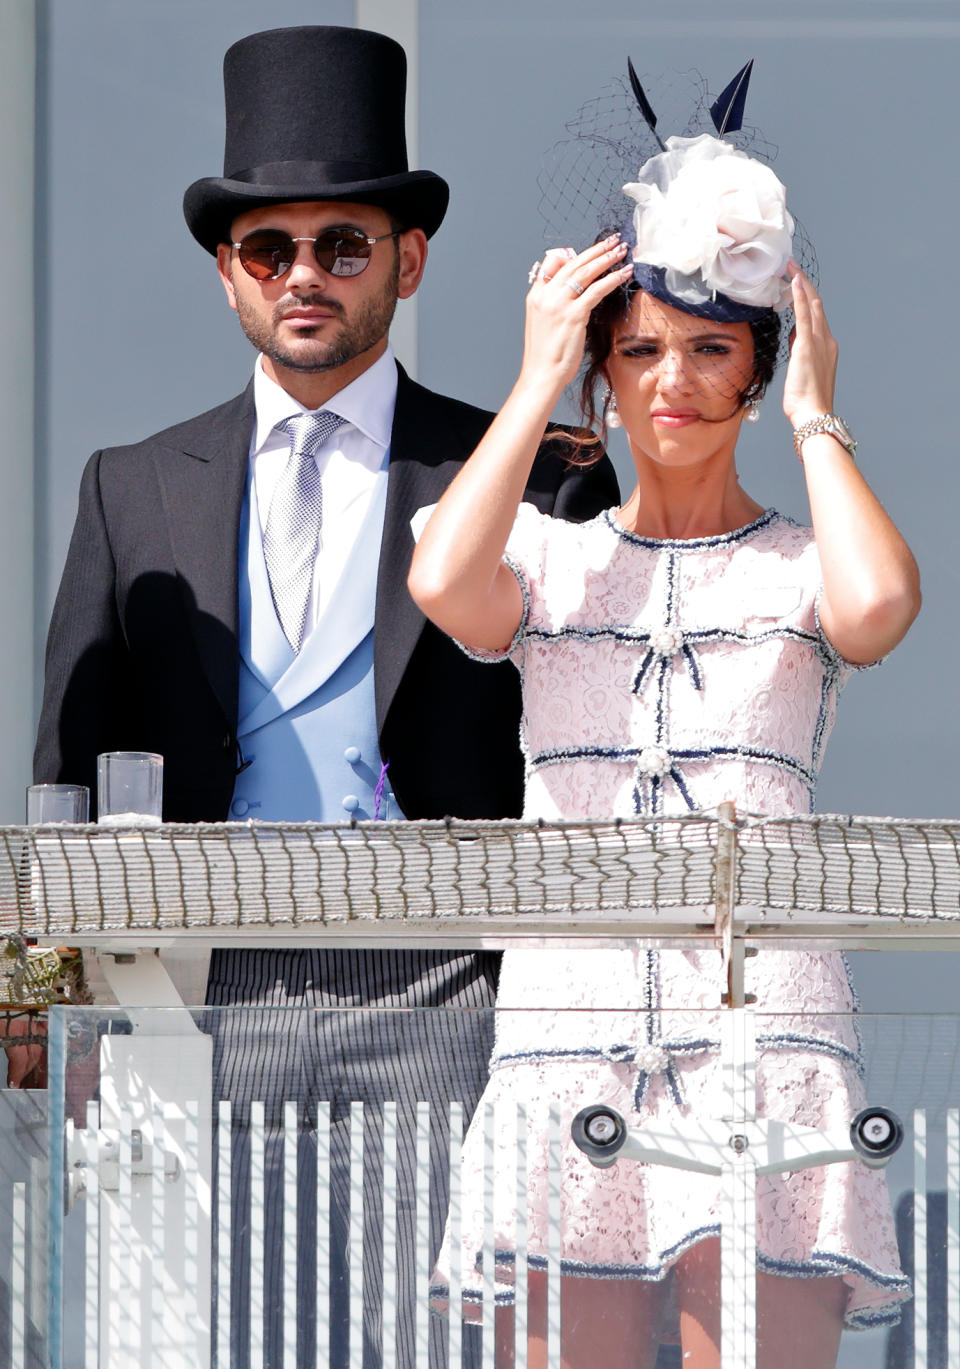 EPSOM, UNITED KINGDOM - JUNE 01: (EMBARGOED FOR PUBLICATION IN UK NEWSPAPERS UNTIL 24 HOURS AFTER CREATE DATE AND TIME) Ryan Thomas and Lucy Mecklenburgh watch the racing as they attend 'Derby Day' of the Investec Derby Festival at Epsom Racecourse on June 1, 2019 in Epsom, England. (Photo by Max Mumby/Indigo/Getty Images)